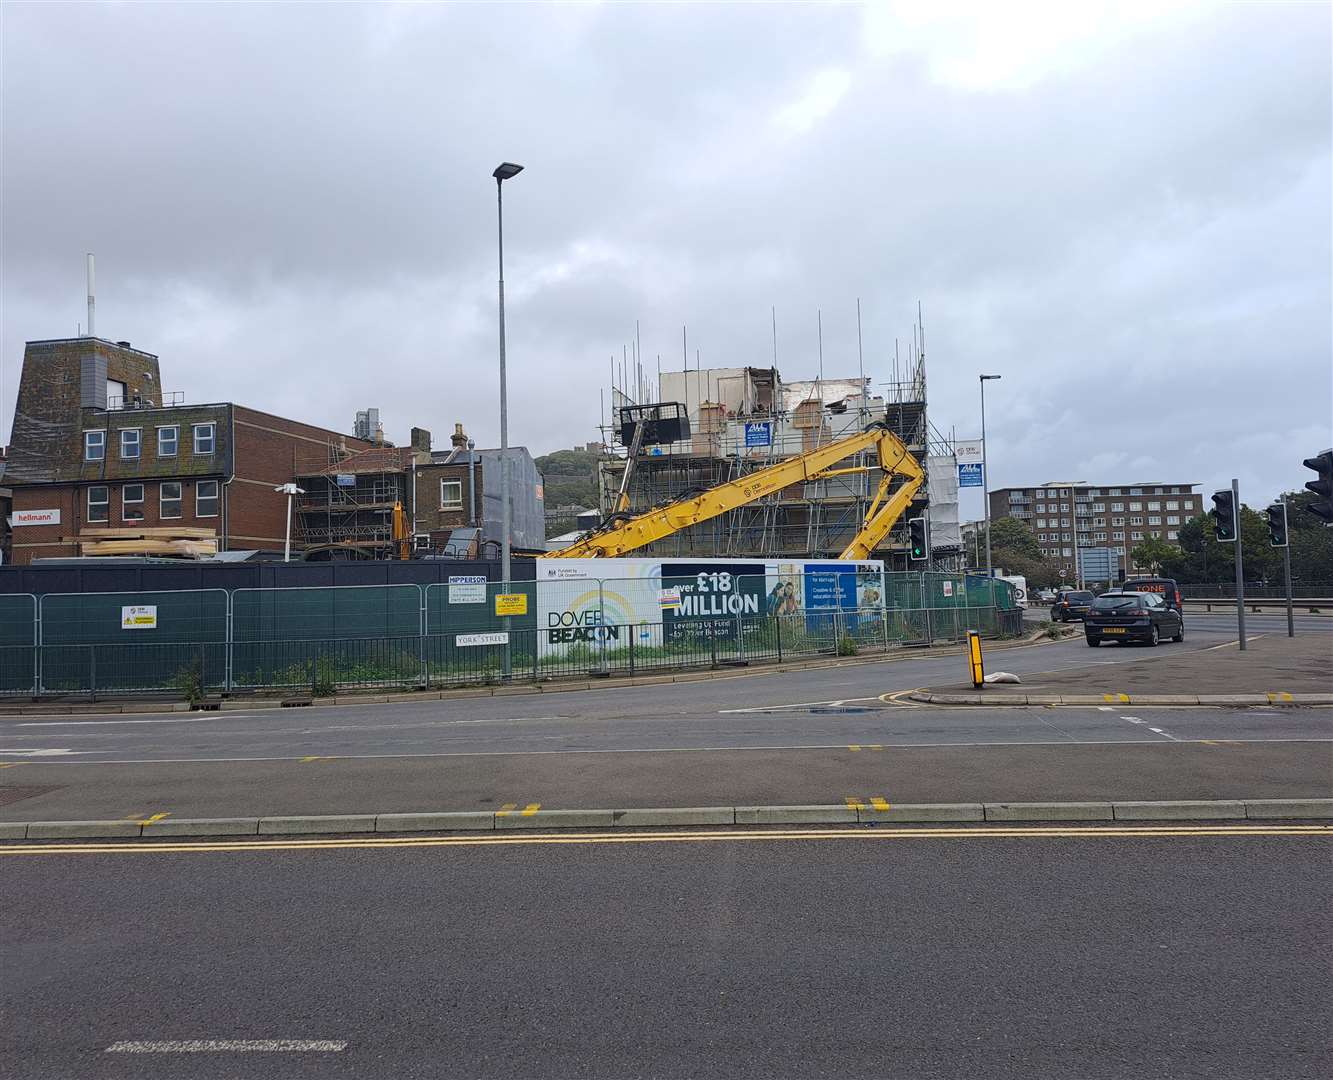 The demolition of the Banksy building in Dover is underway